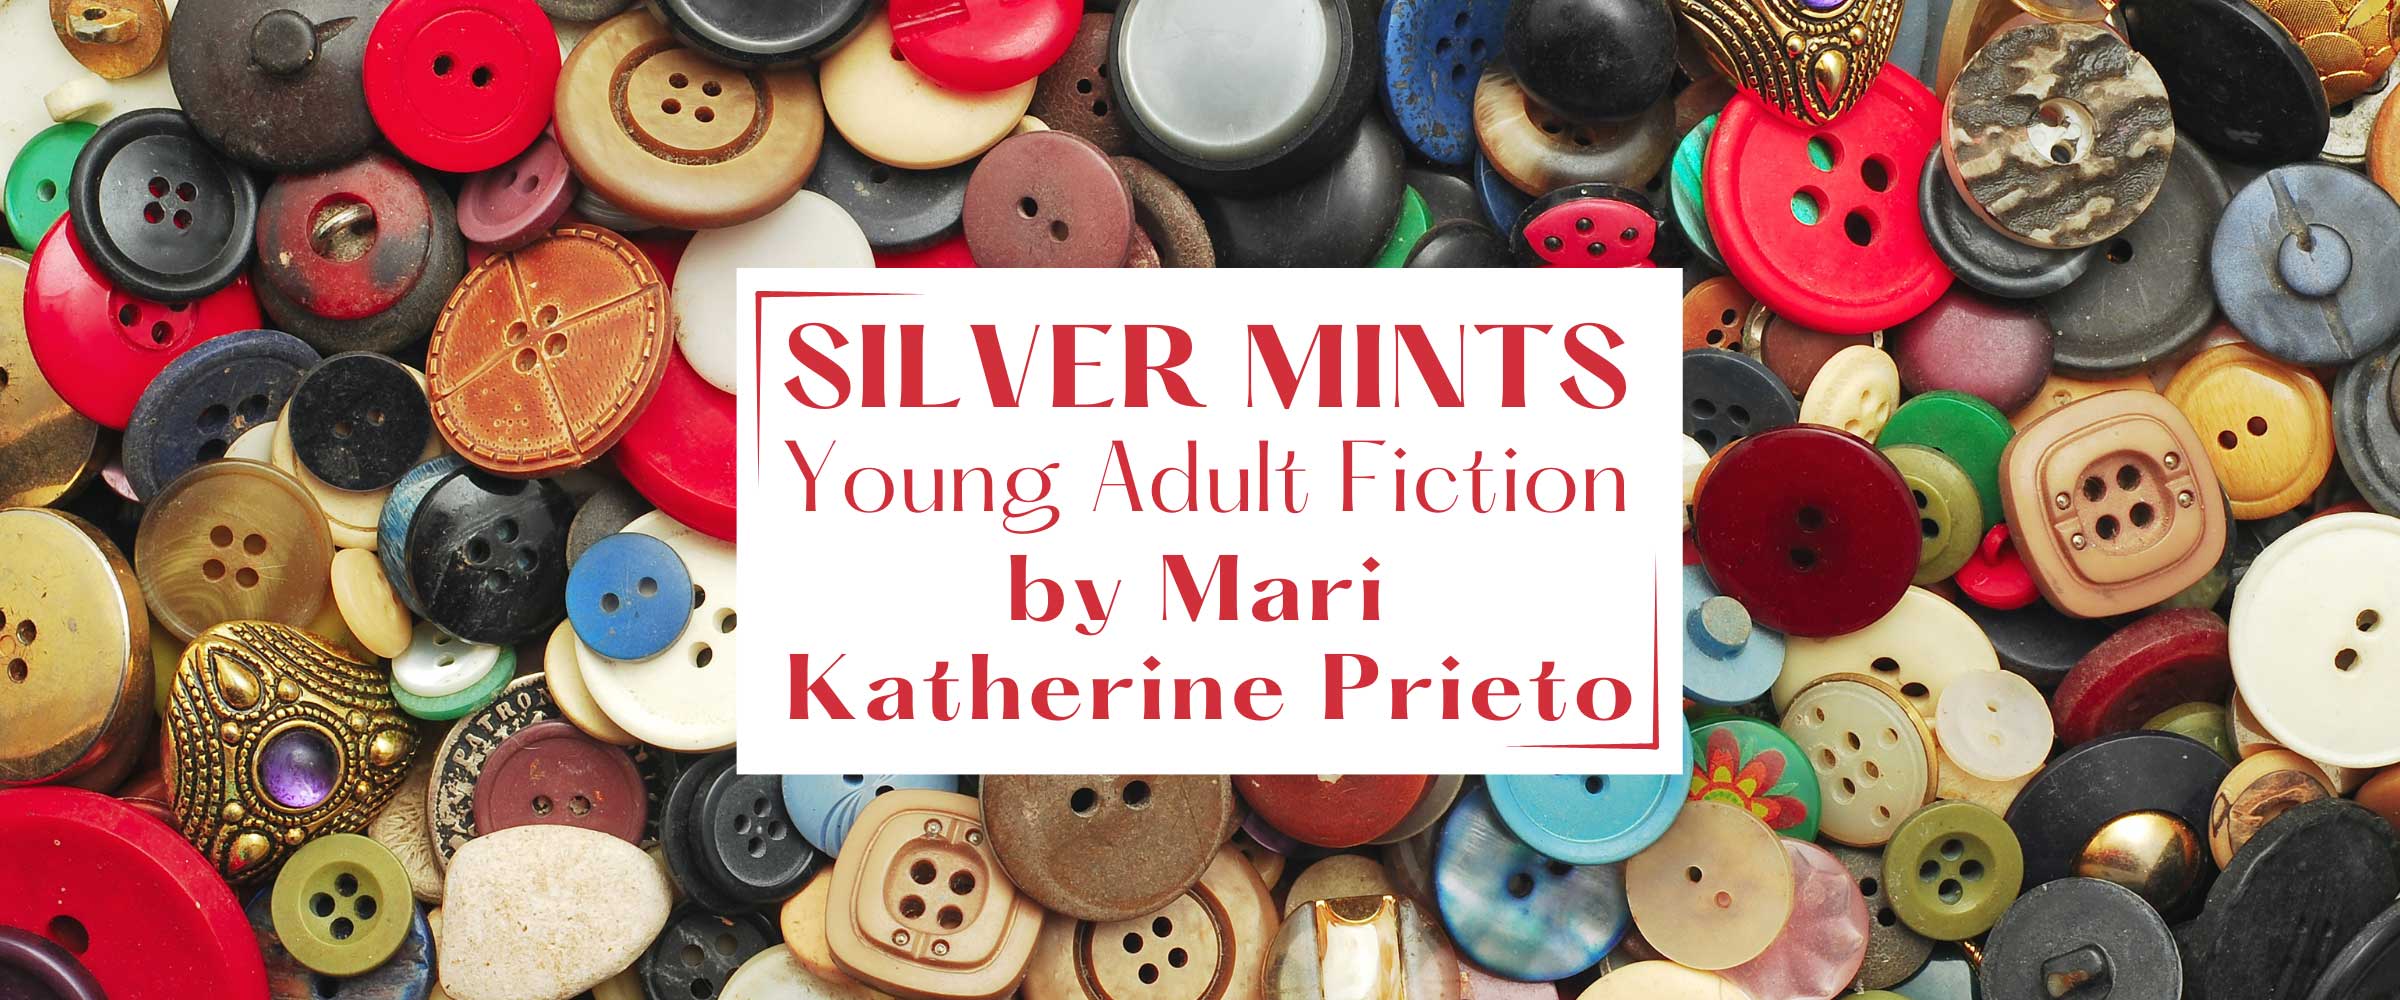 Silver Mints - Young Adult Fiction by Mari Katherine Prieto